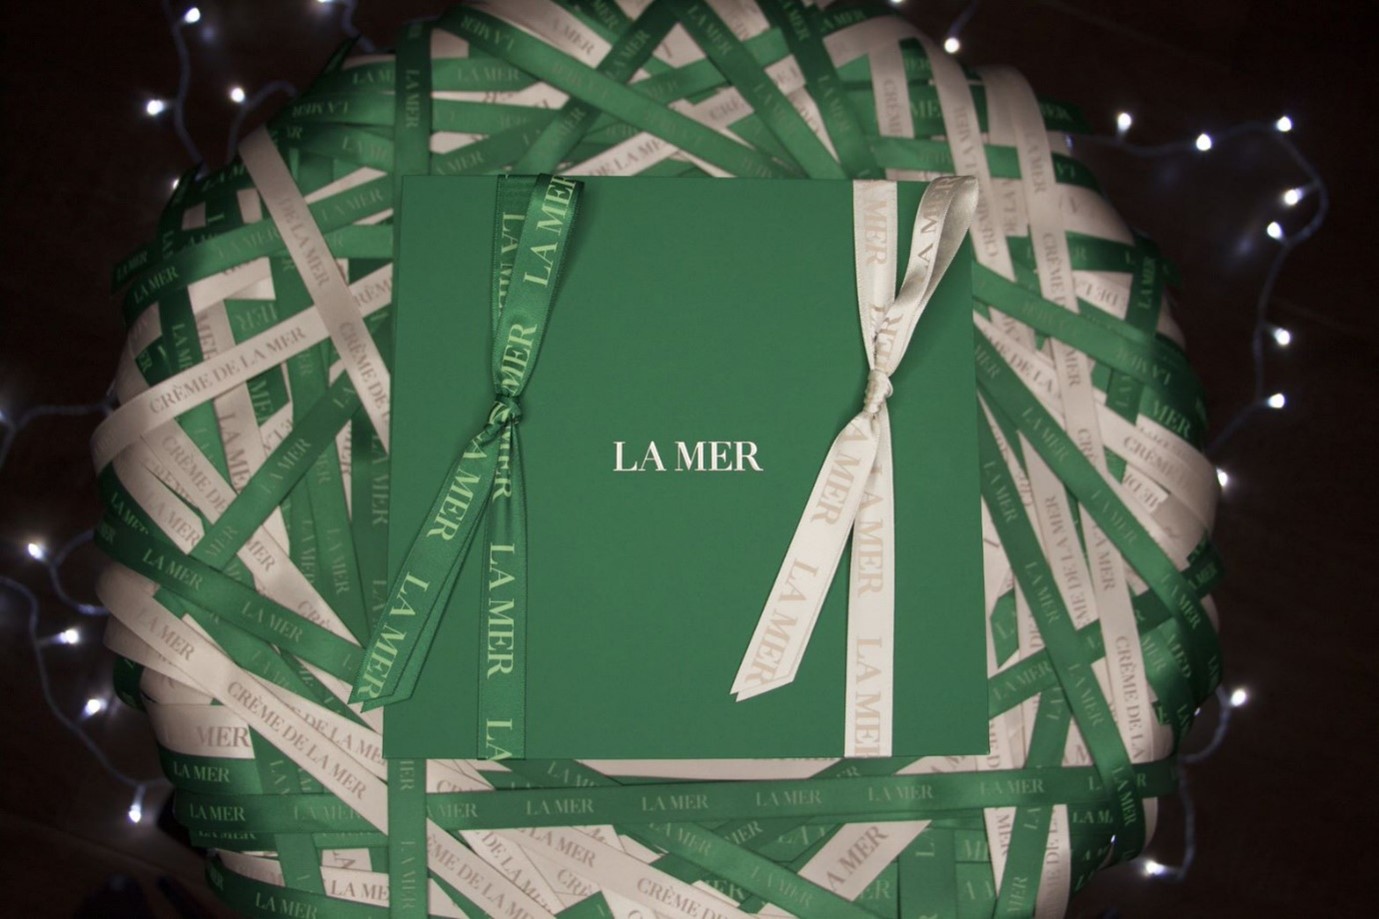 La Mer Green Packaging with Green and White Ribbons